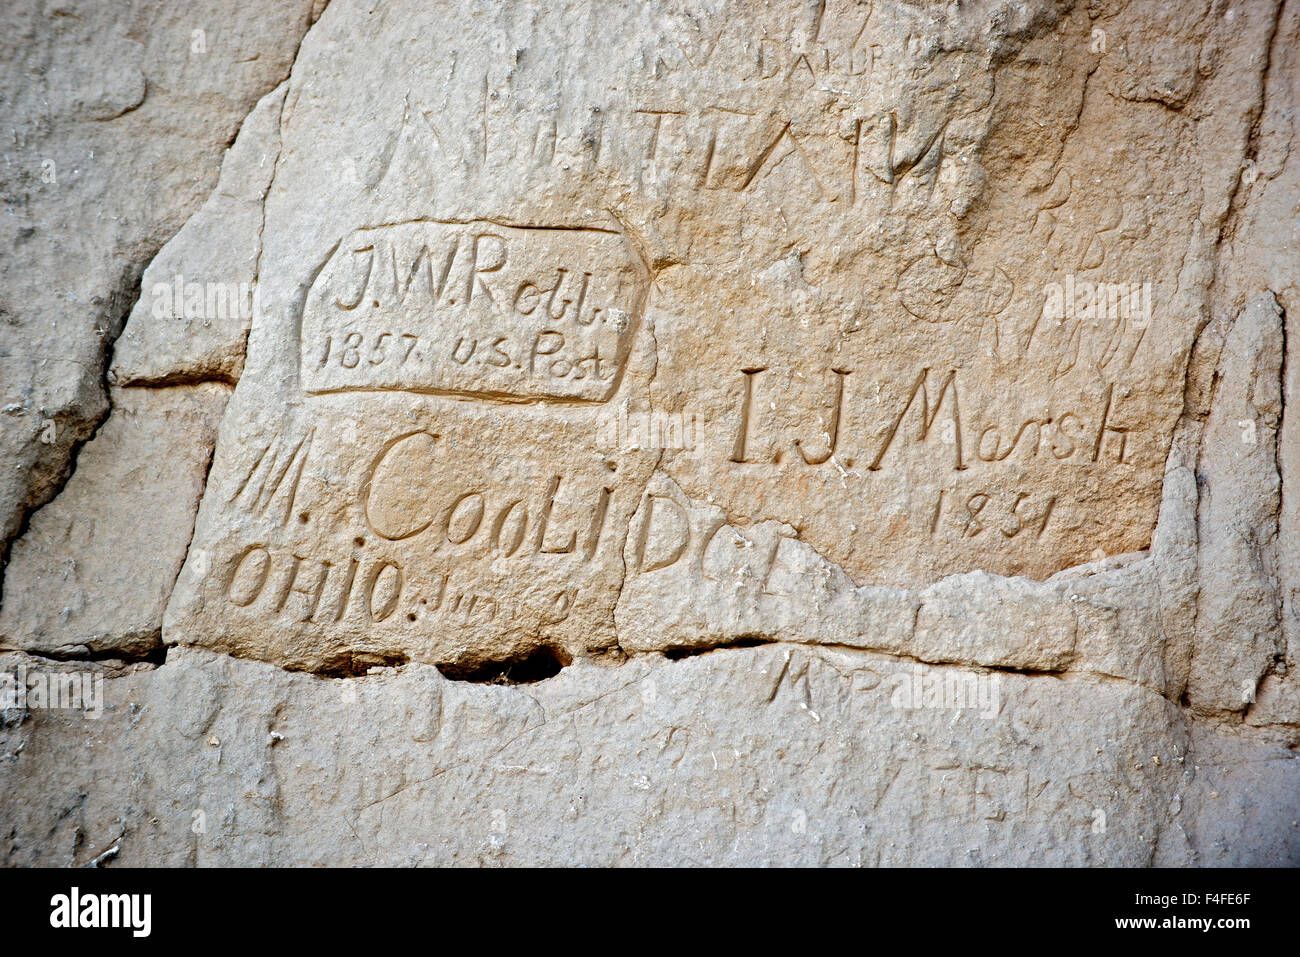 J.W. Robb, 1857. Register Cliff was a key navigational landmark on the Oregon Trail as it passed along the North Platte River, near present Day Guernsey Wyoming. Many emigrants carved their name in the soft sandstone. (Large format sizes available) Stock Photo